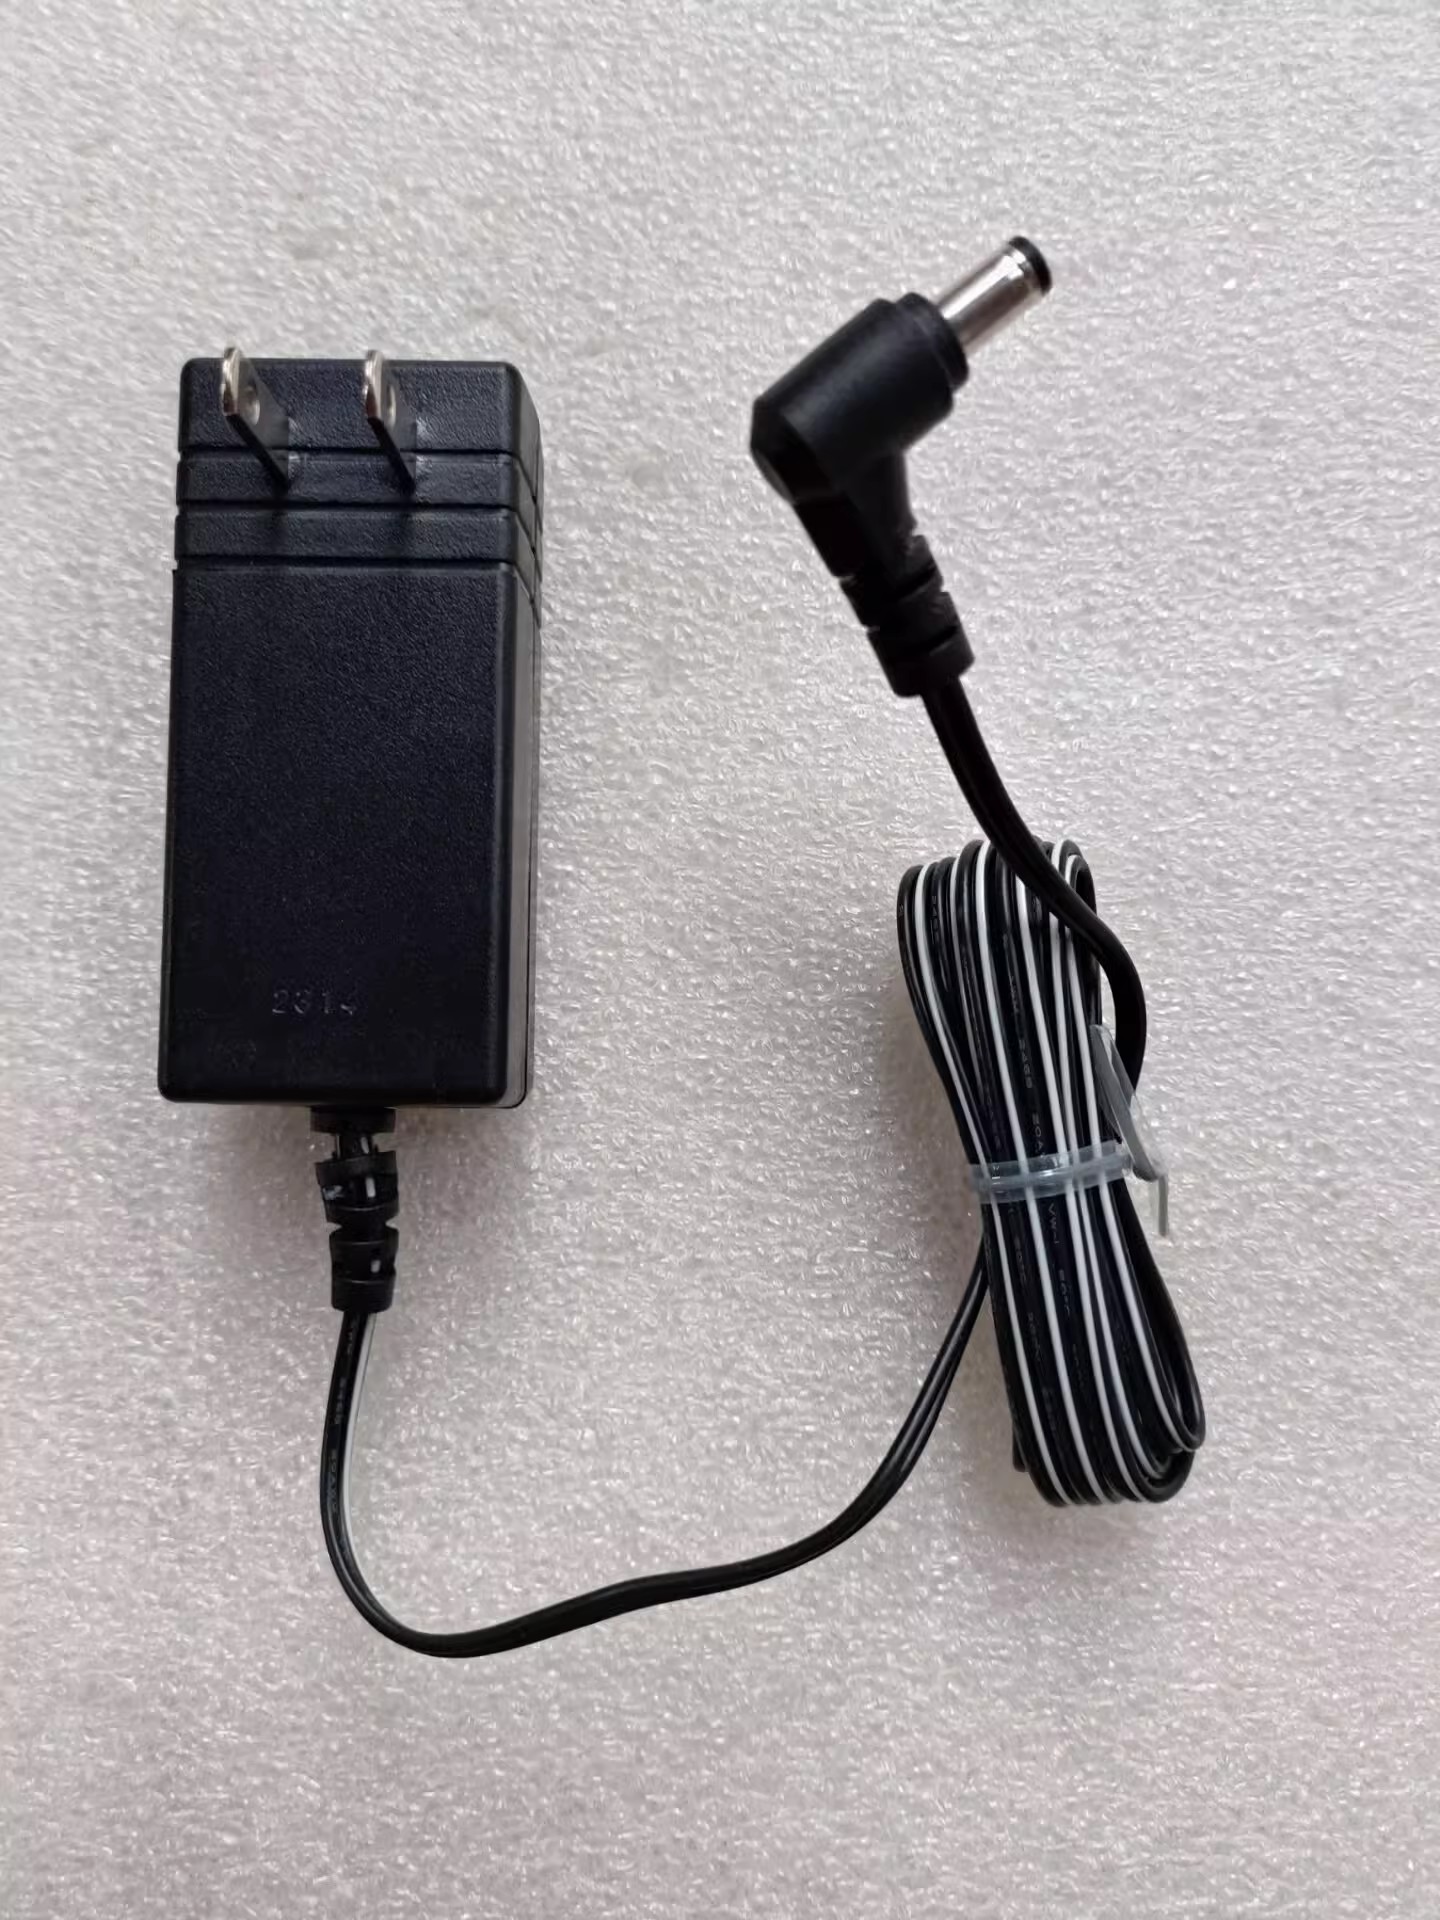 *Brand NEW* KENWOOD W08-1203 DC9V 1A AC DC ADAPTHE POWER Supply